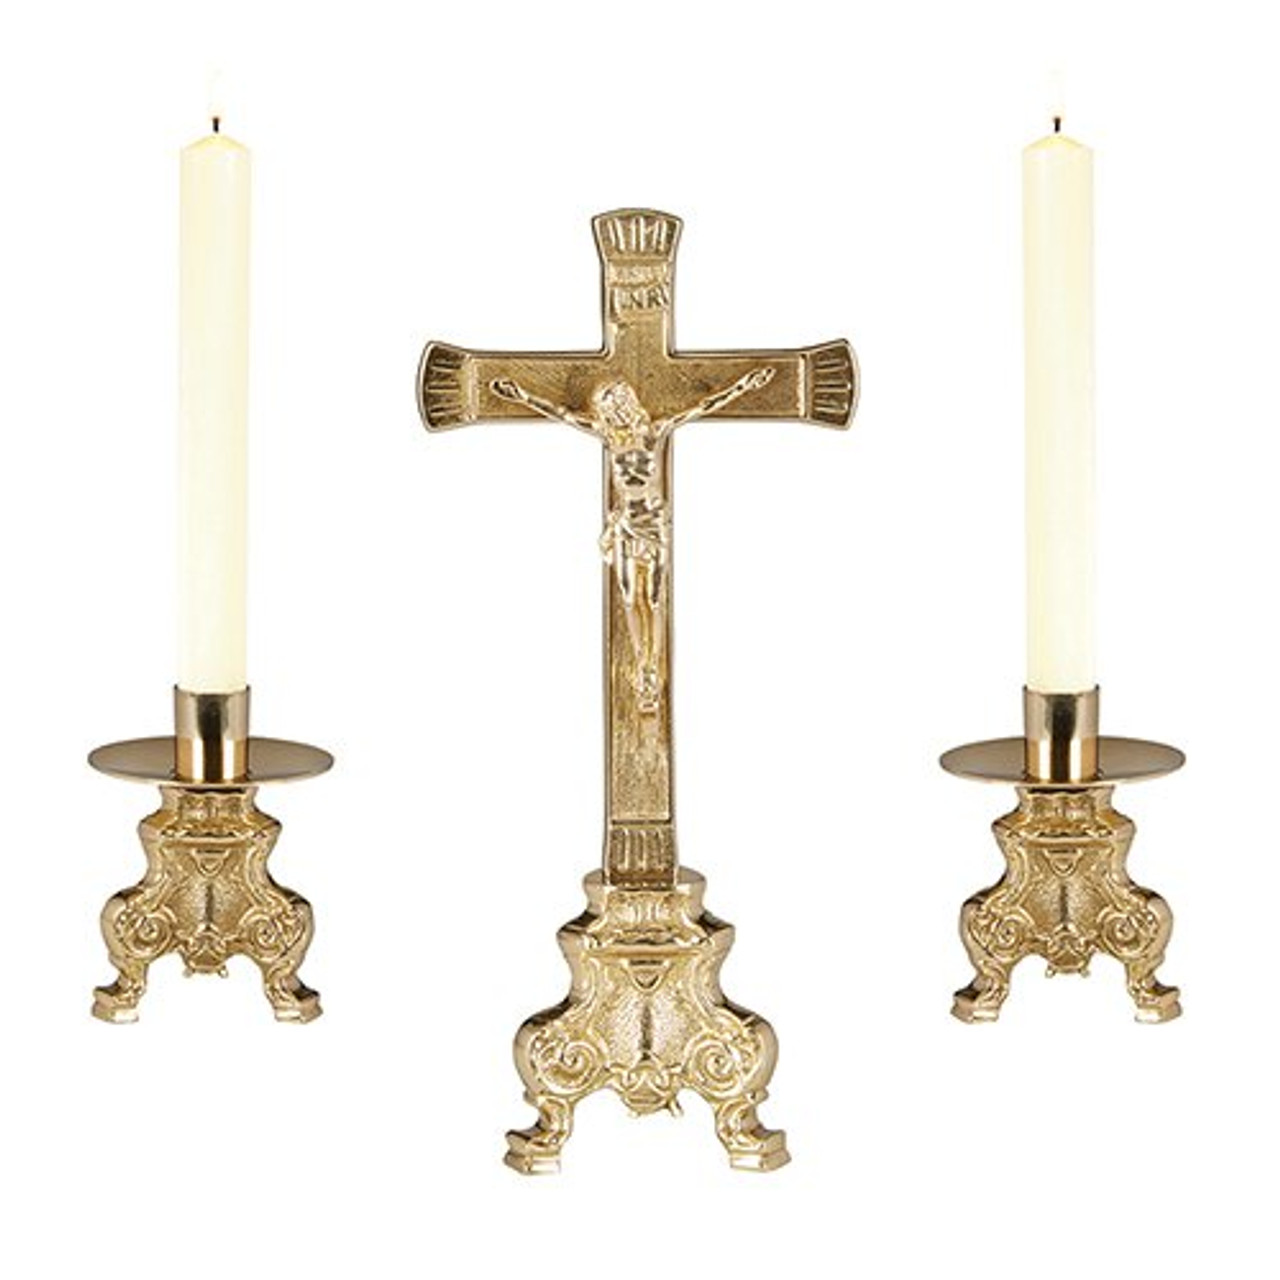 A pair of Church Alter candle sticks